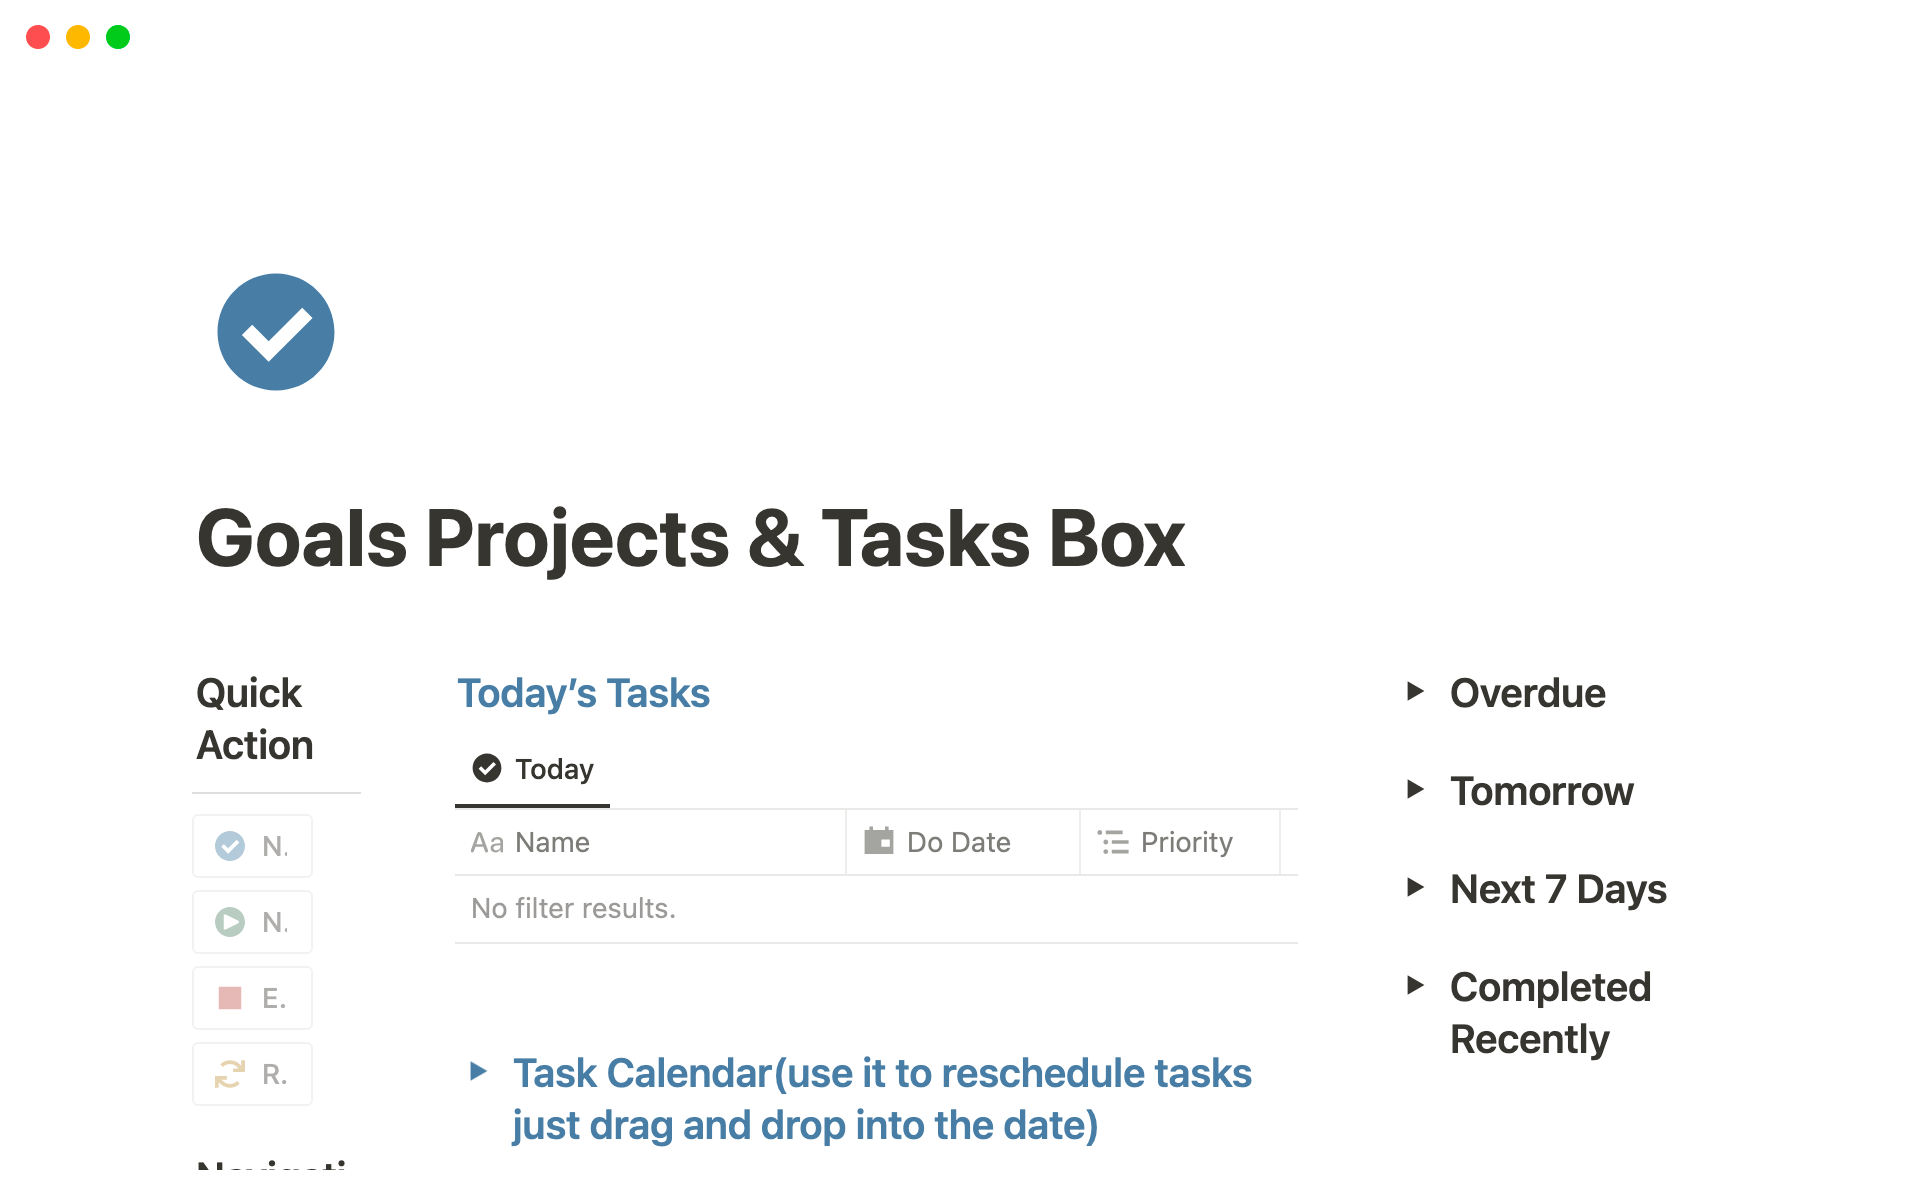 The Goals project & Task Box helps you track the time you spend on each task, assign tasks to projects, and projects to goals. This targeted approach helps you stay focused and motivated, ensuring you make progress towards your desired outcome.